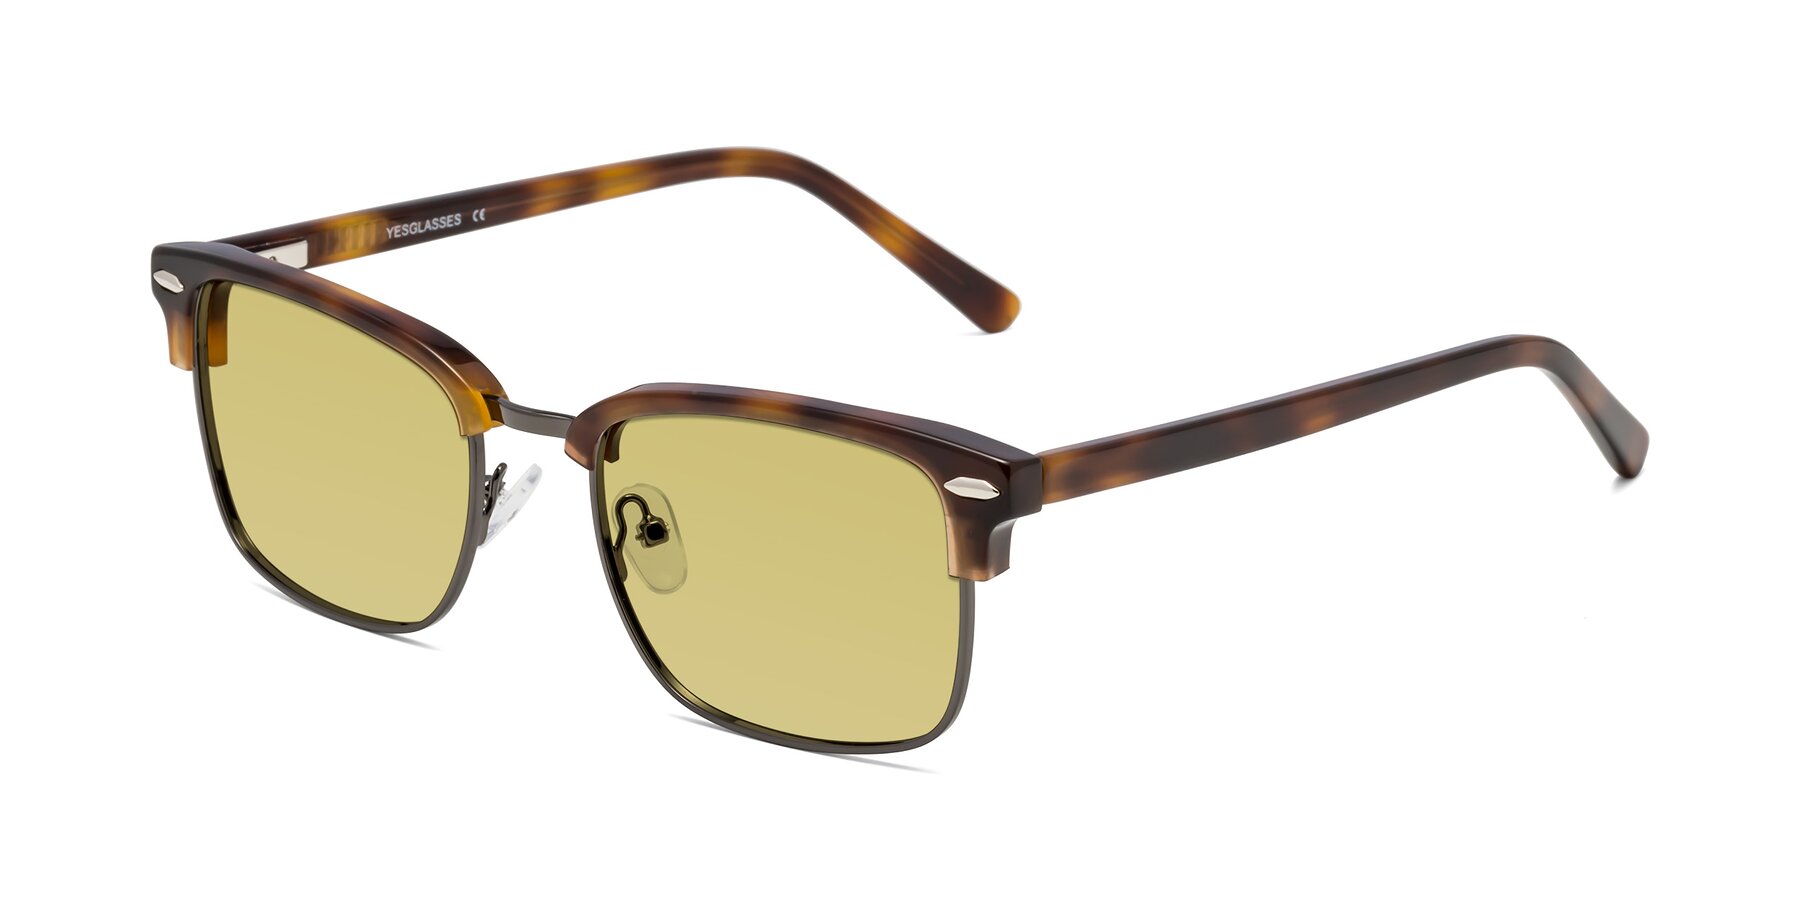 Angle of 17464 in Tortoise/ Gunmetal with Medium Champagne Tinted Lenses